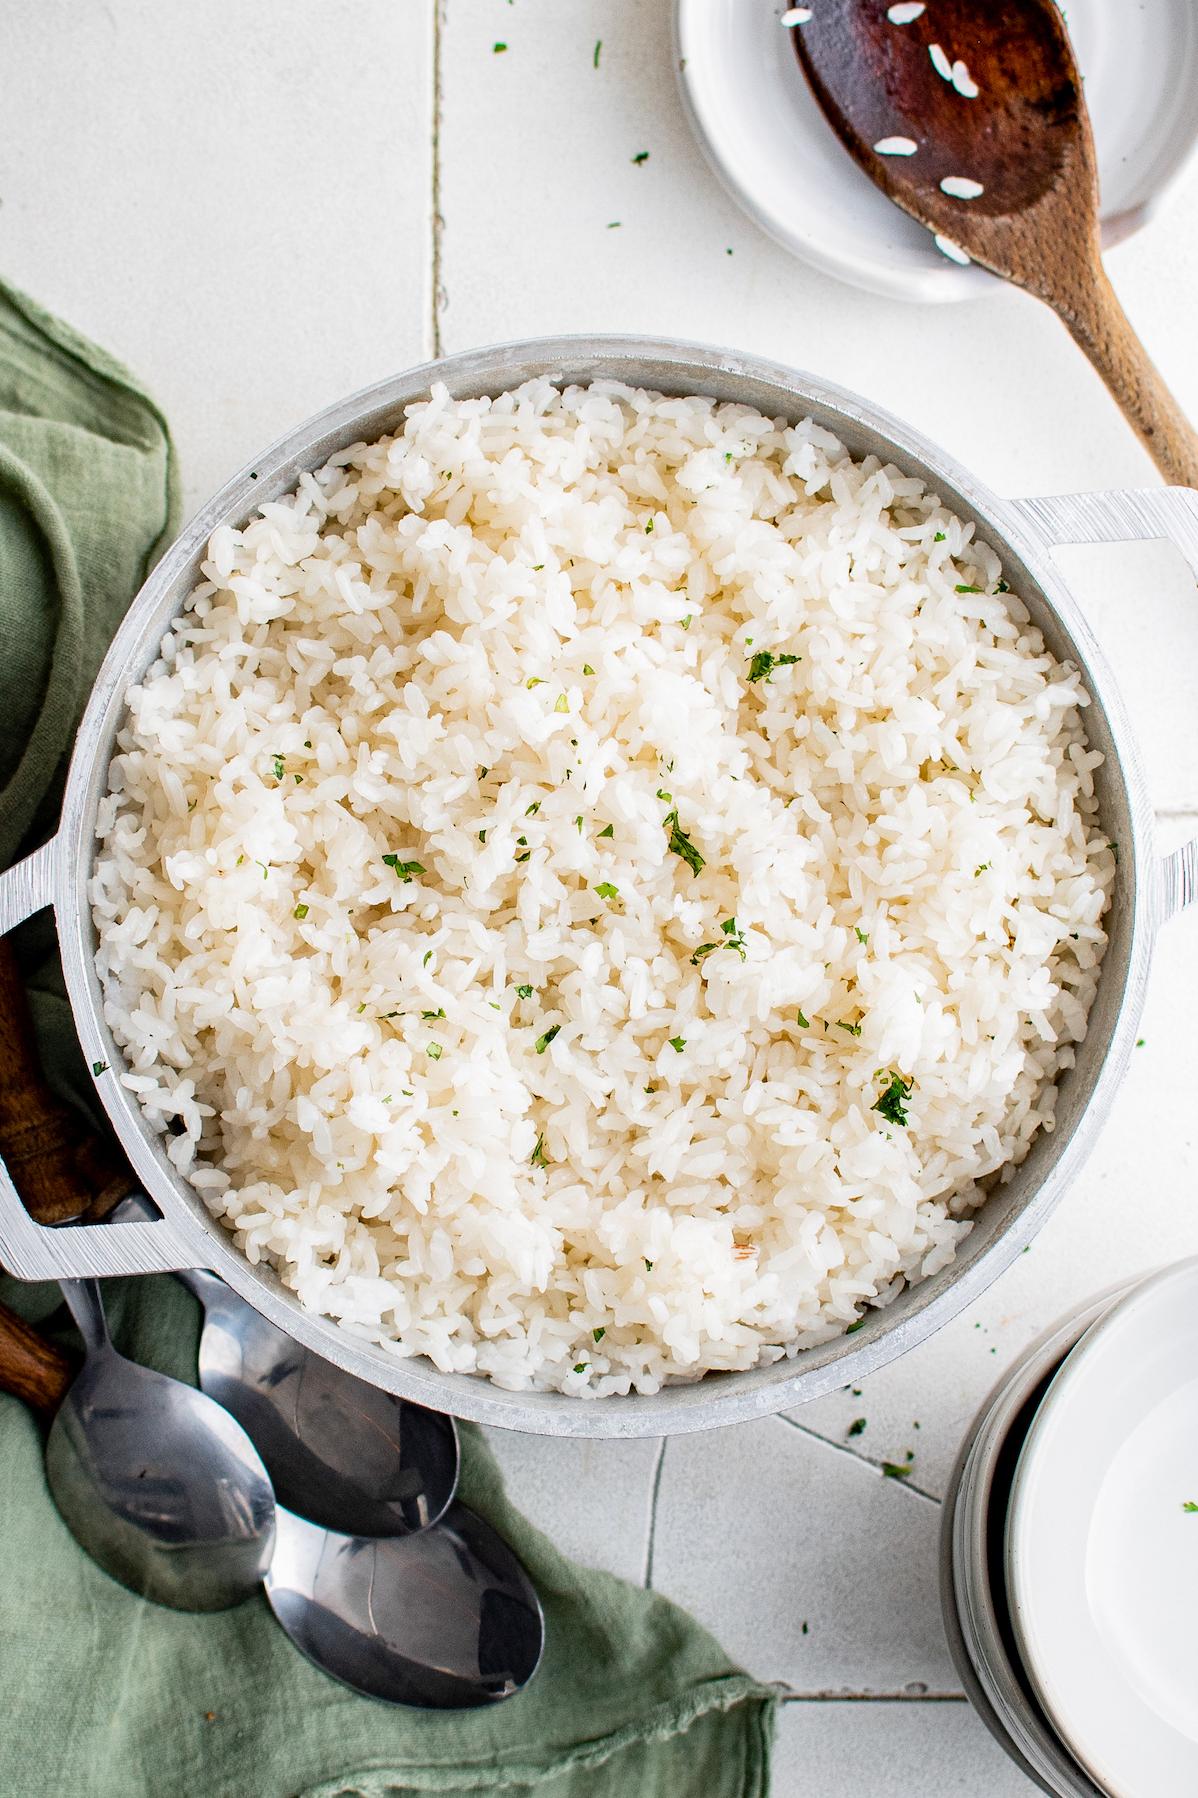  White rice cooked to perfection, fluffy and full of flavor.